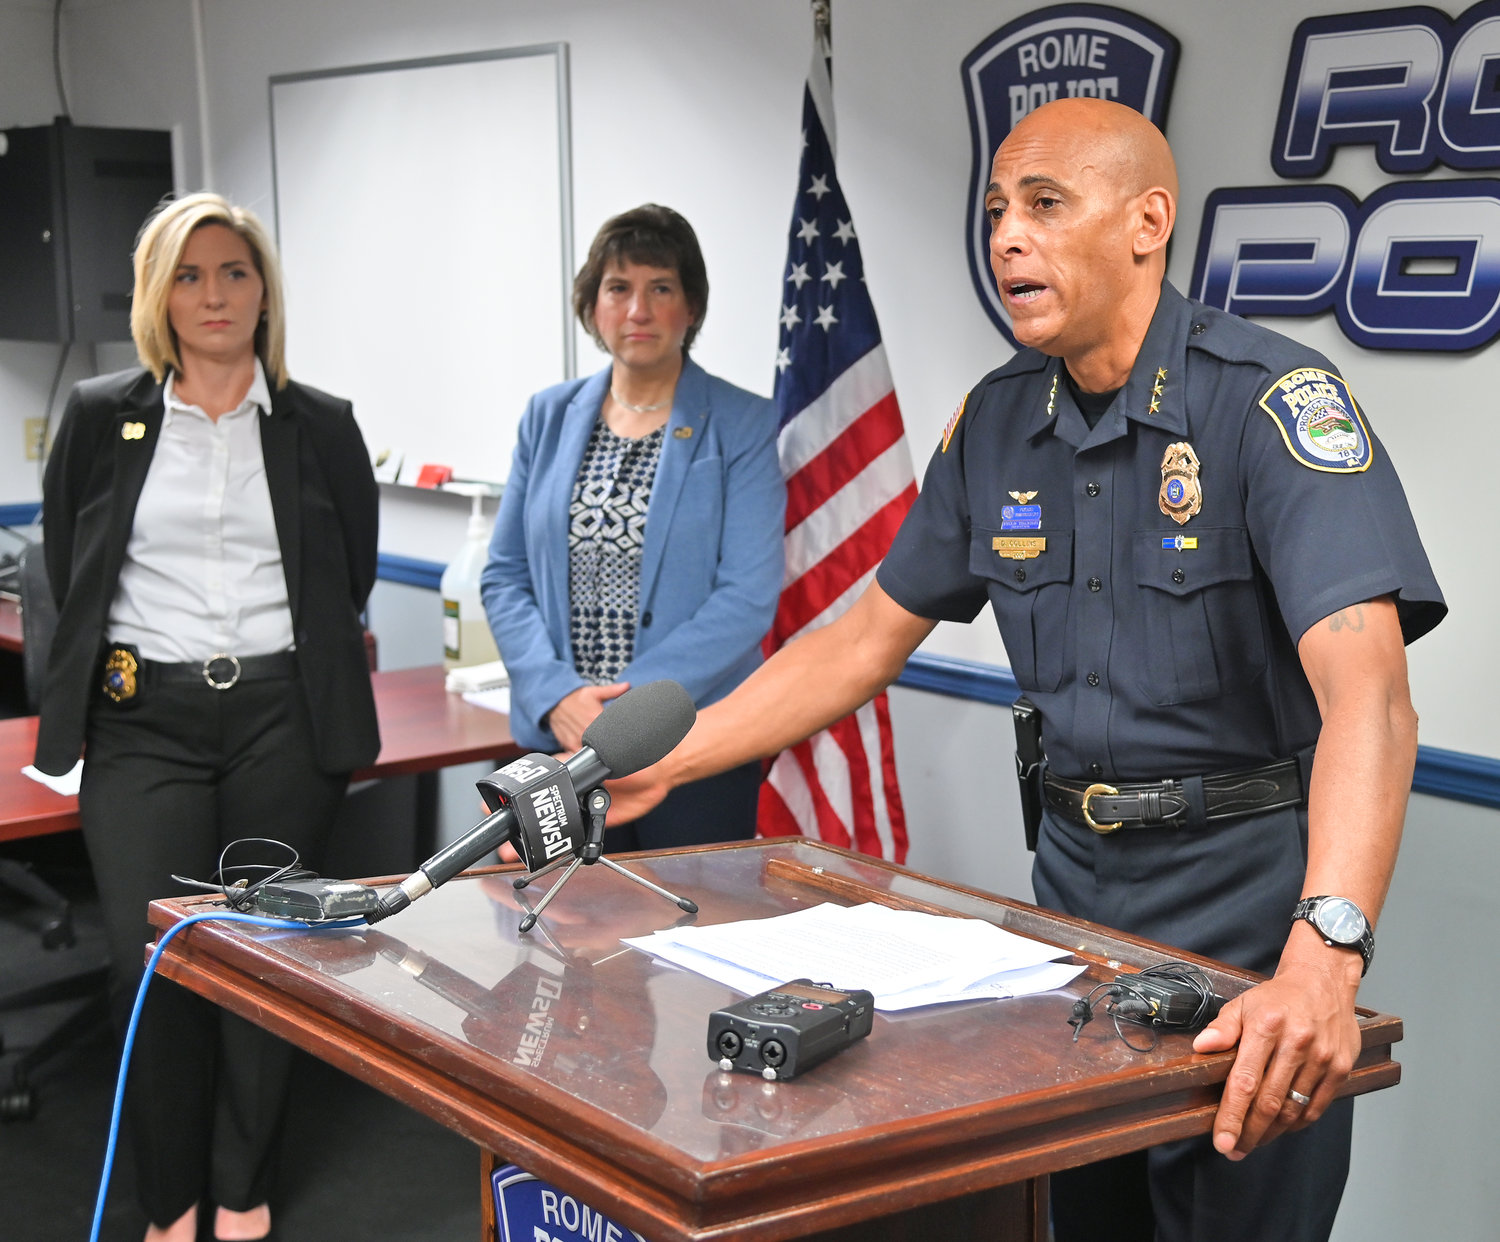 Rome Police Chief David J. Collins unveils the department’s new Street Crimes Unit on Tuesday. The unit will operate independently from the rest of the Patrol Division to focus their efforts on gun and drug-related crimes in Rome. He was joined by Lt. Sharon Rood, left, and Mayor Jacquline M. Izzo.